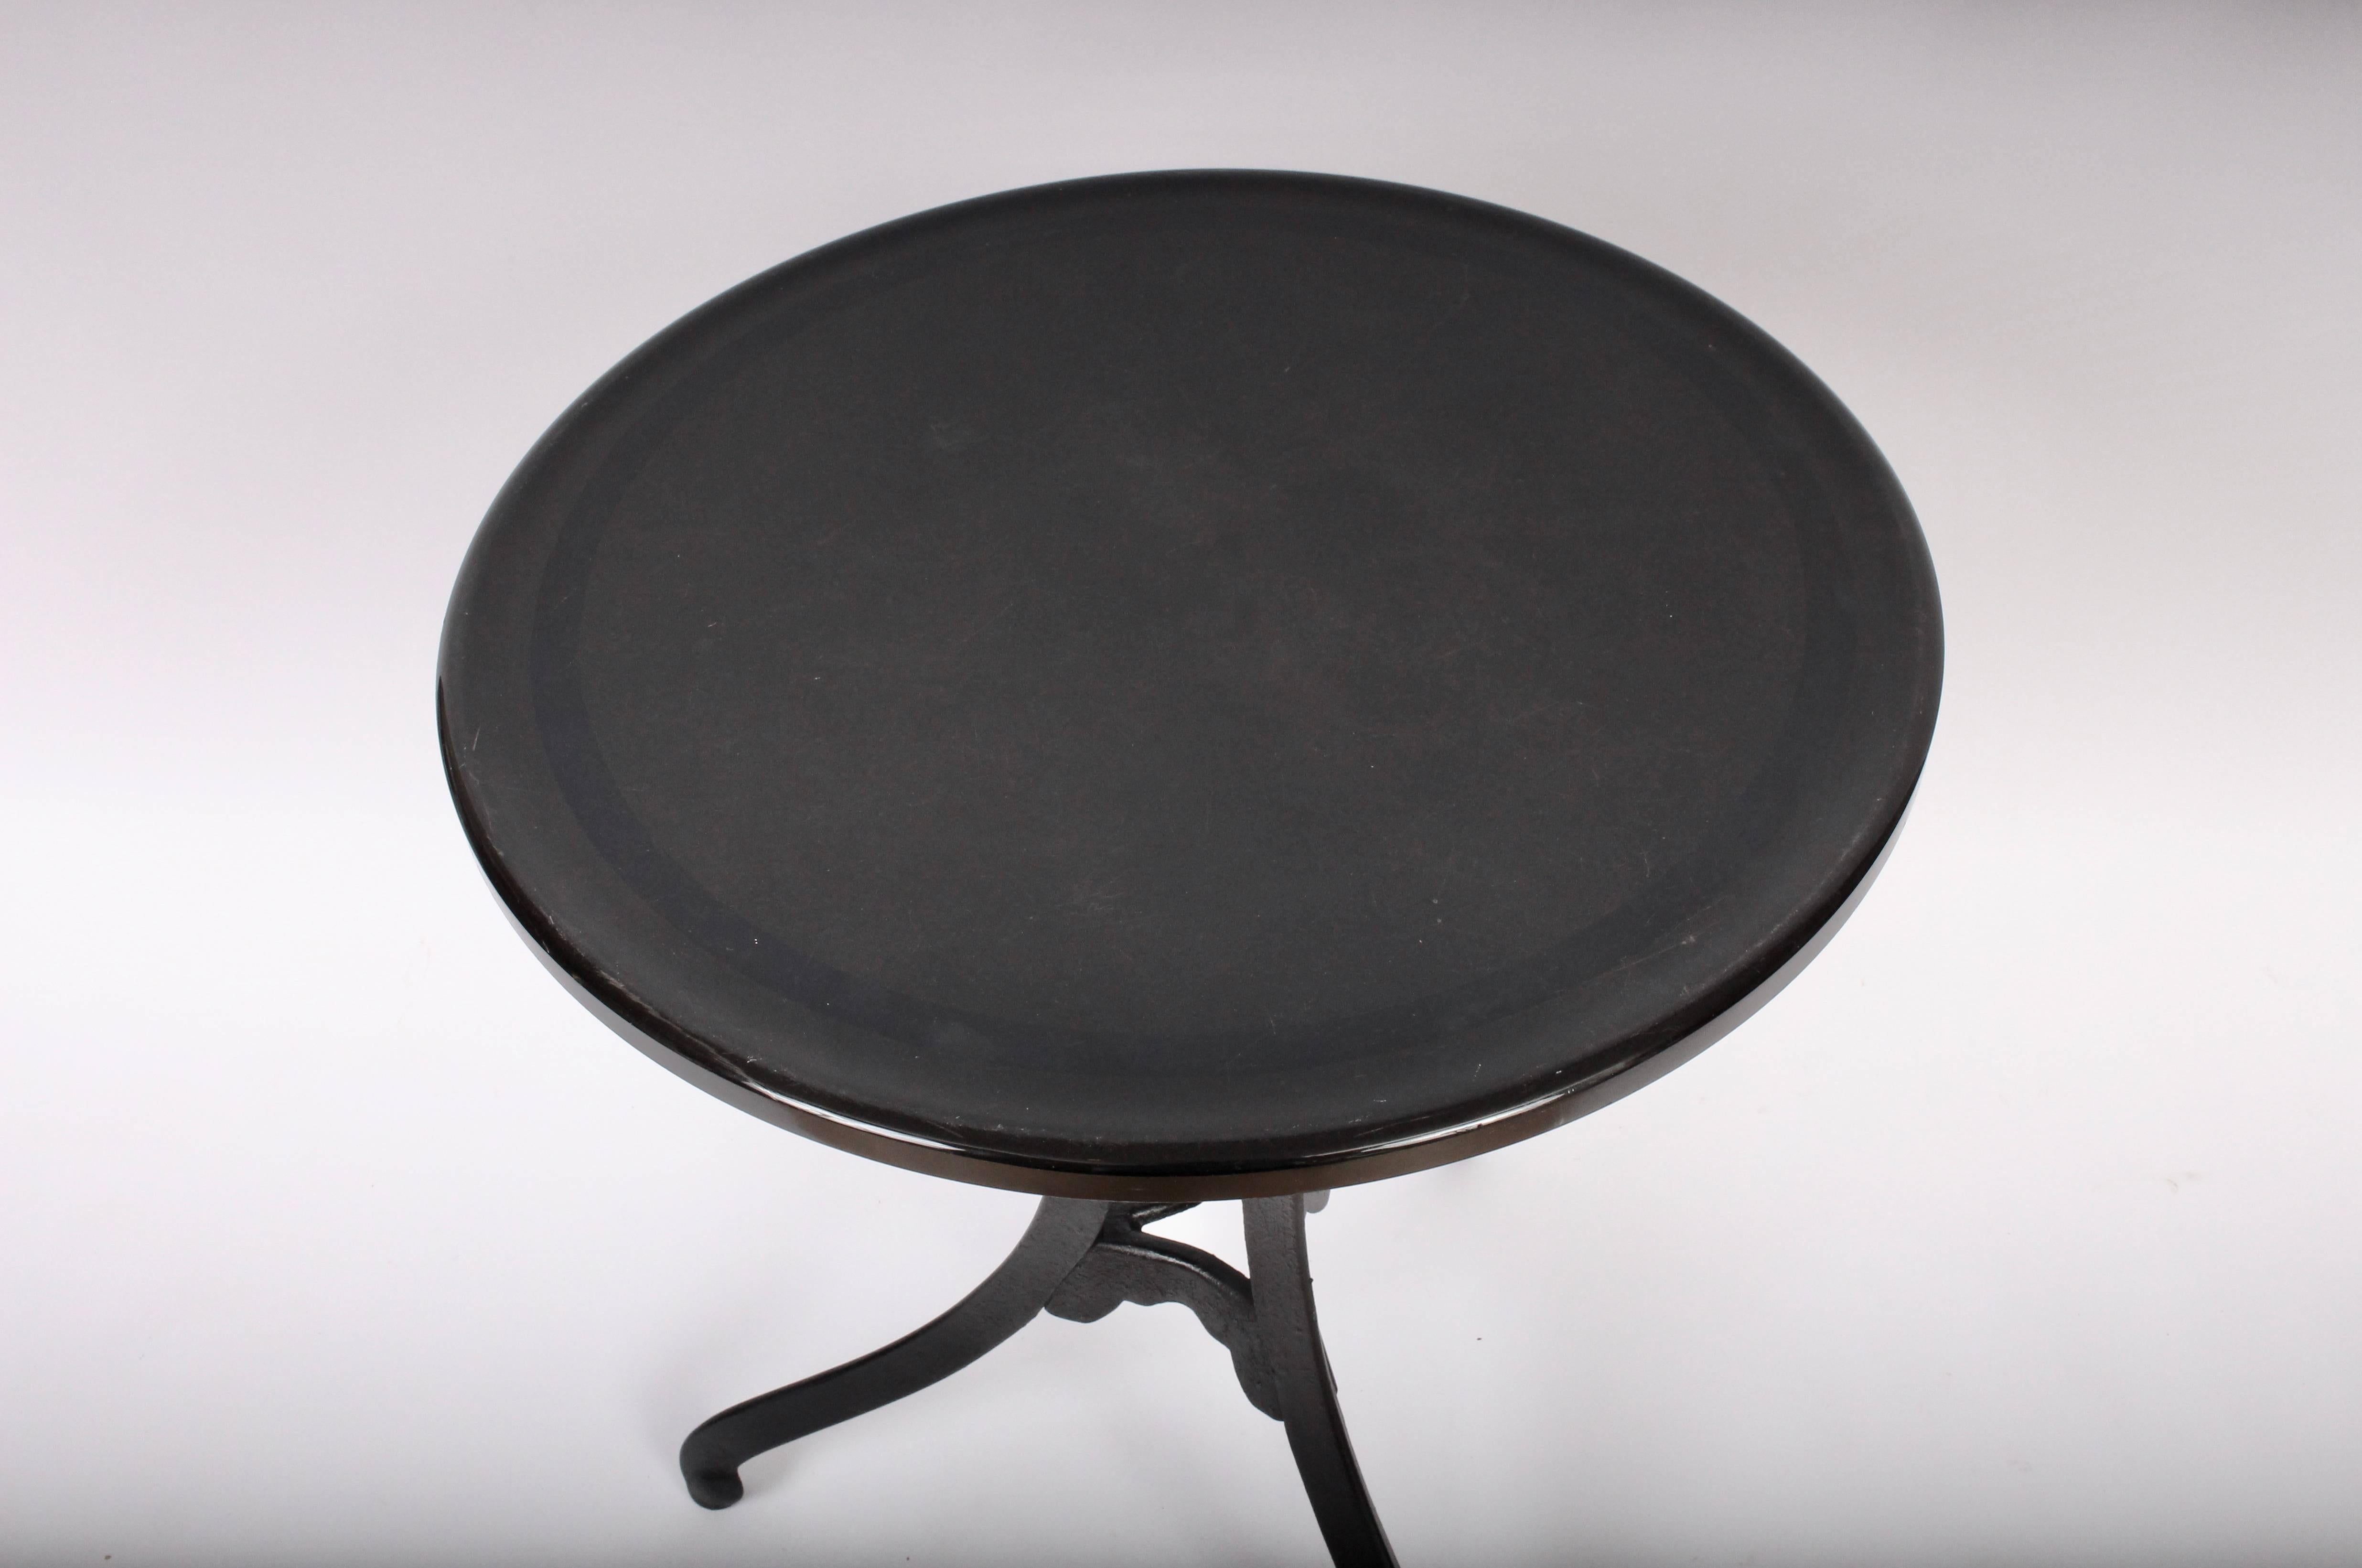 Elegant Edwardian Cast Iron and Black Glass Cafe Table, Front Hall Table, Occasional Table. Featuring an Black Cast Iron tripod base with original vintage round, rounded edge one inch Black Vitrolite glass surface. Minor surface wear to glass. 24W